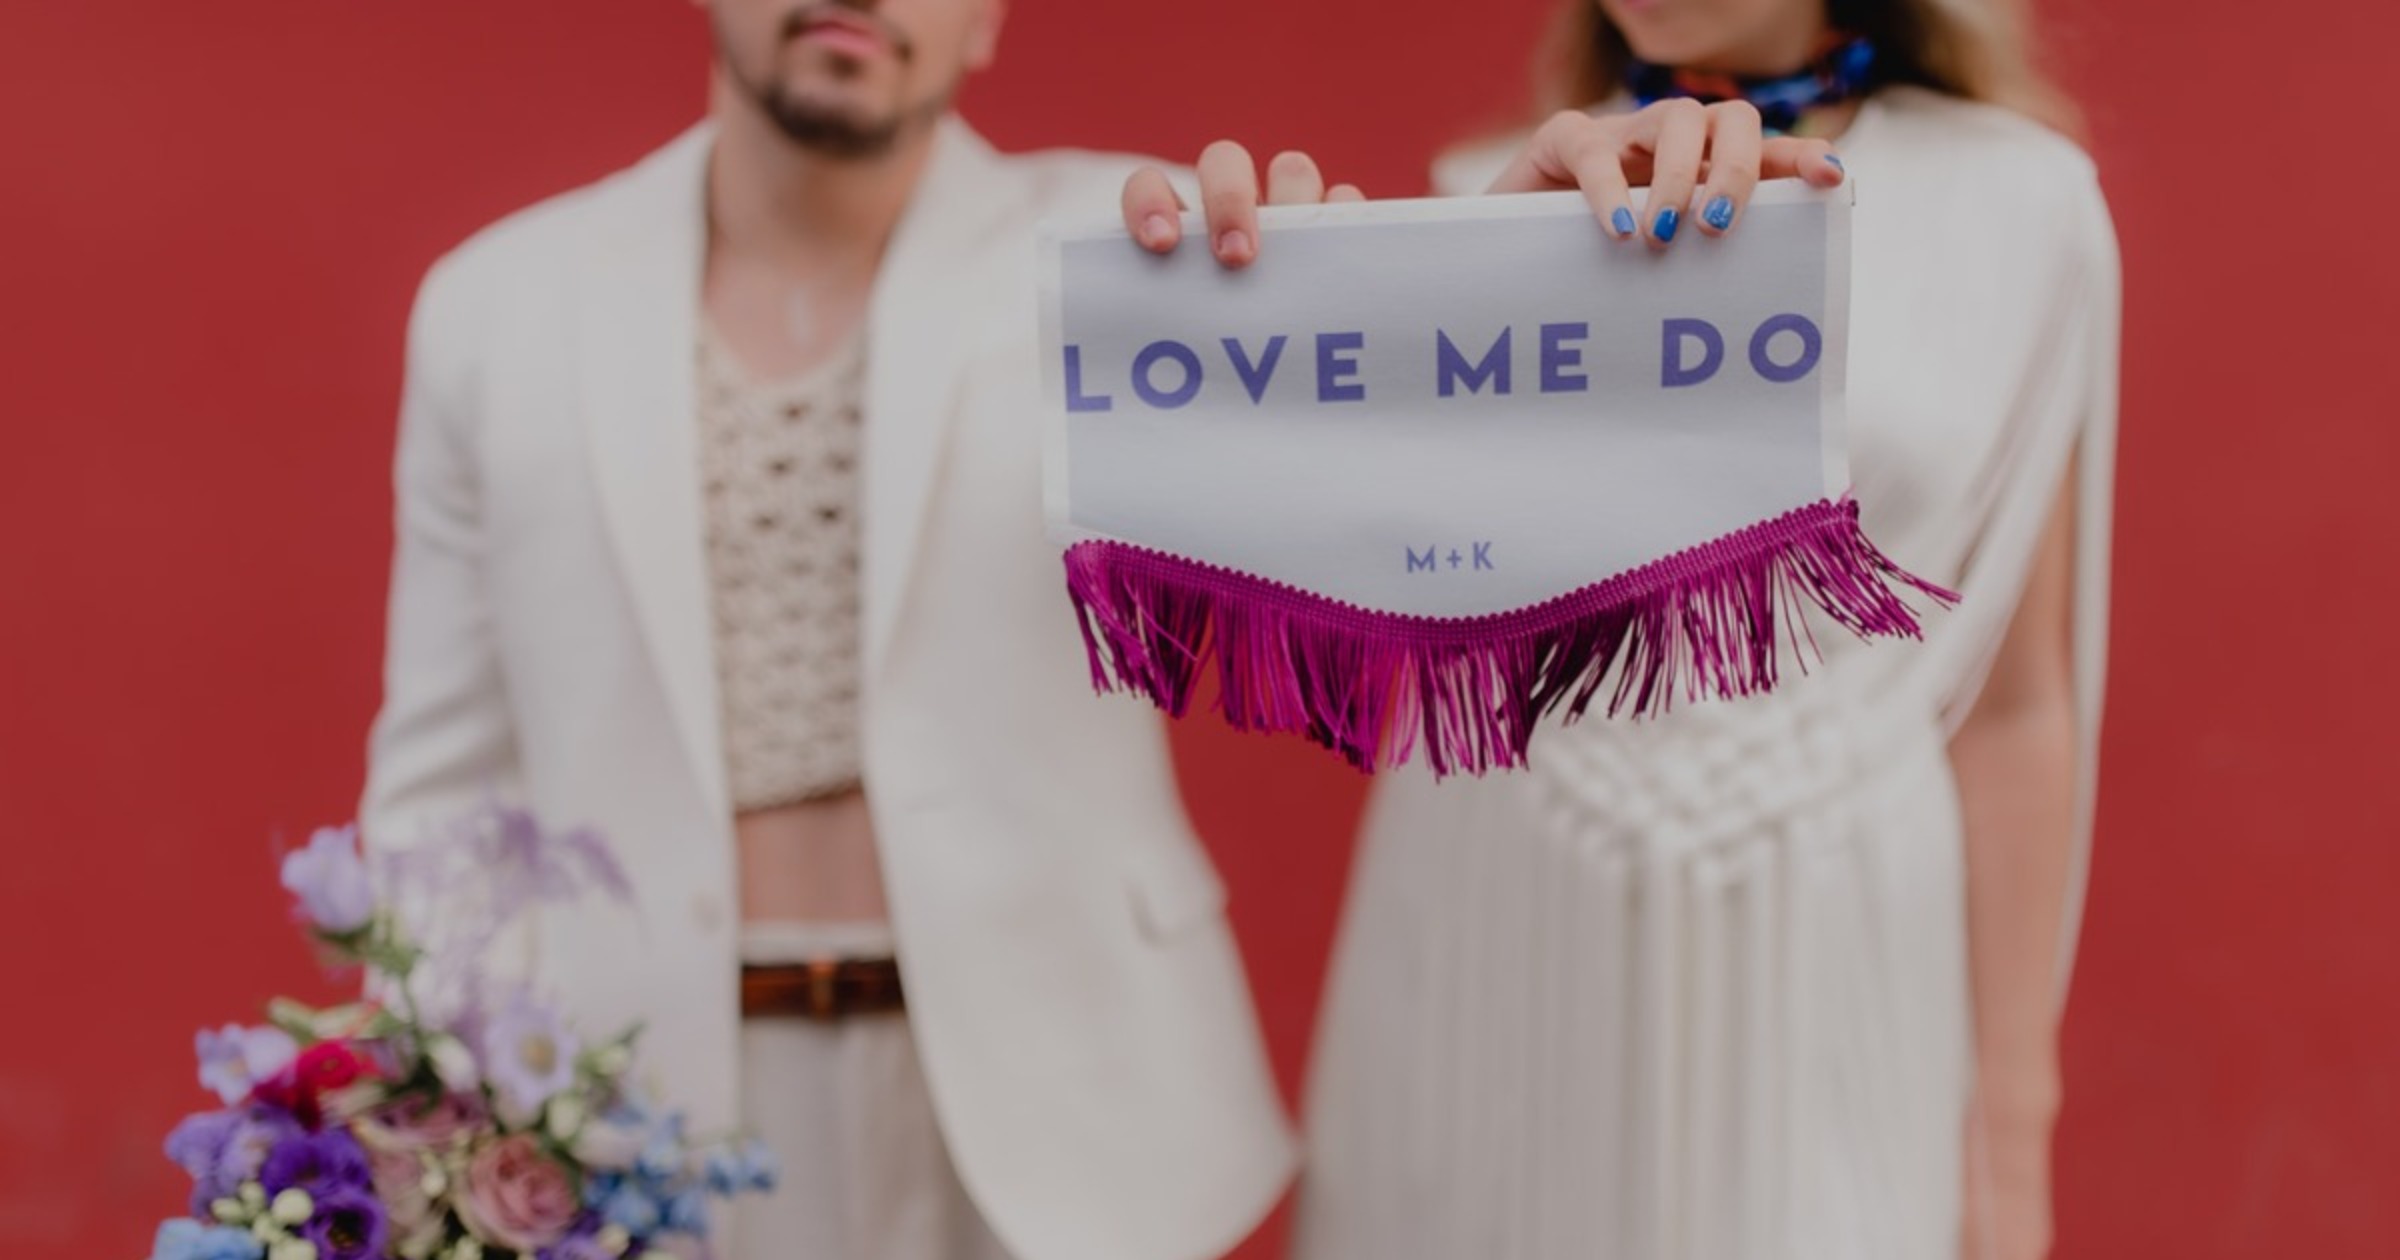 A Festival Inspired Elopement Showcasing the Rebel 60's